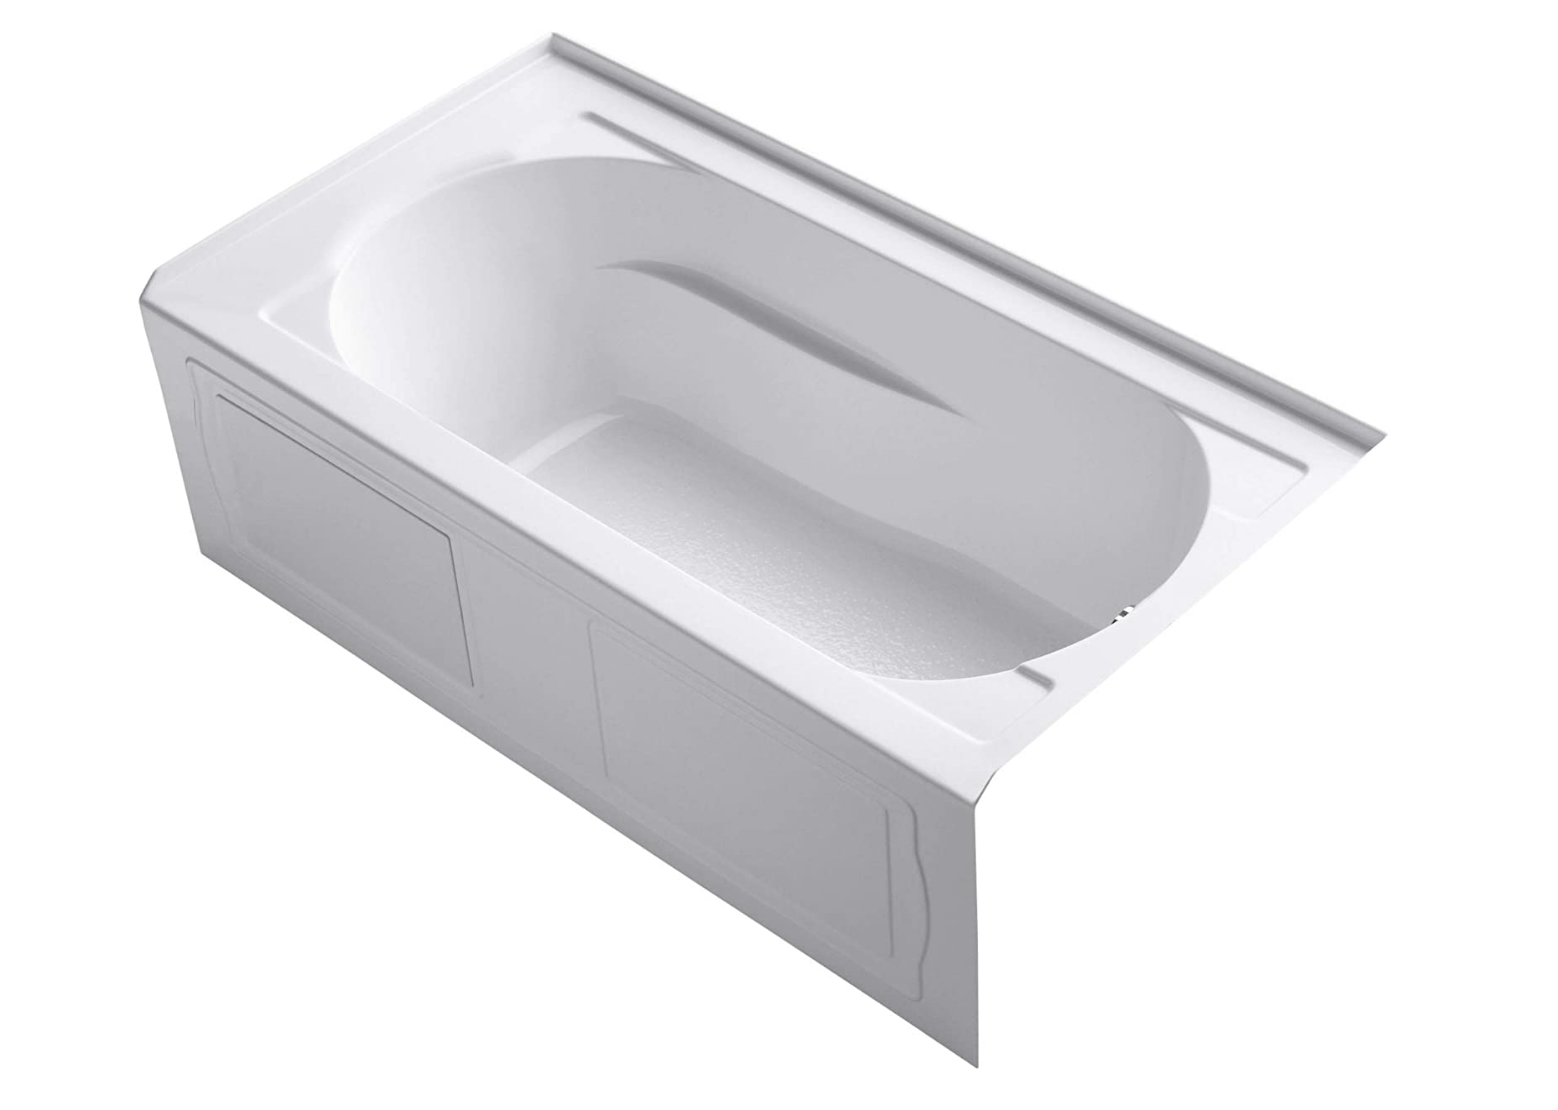 8 Best Whirlpool Tubs Trending in 2023 (Buying Guide Included)